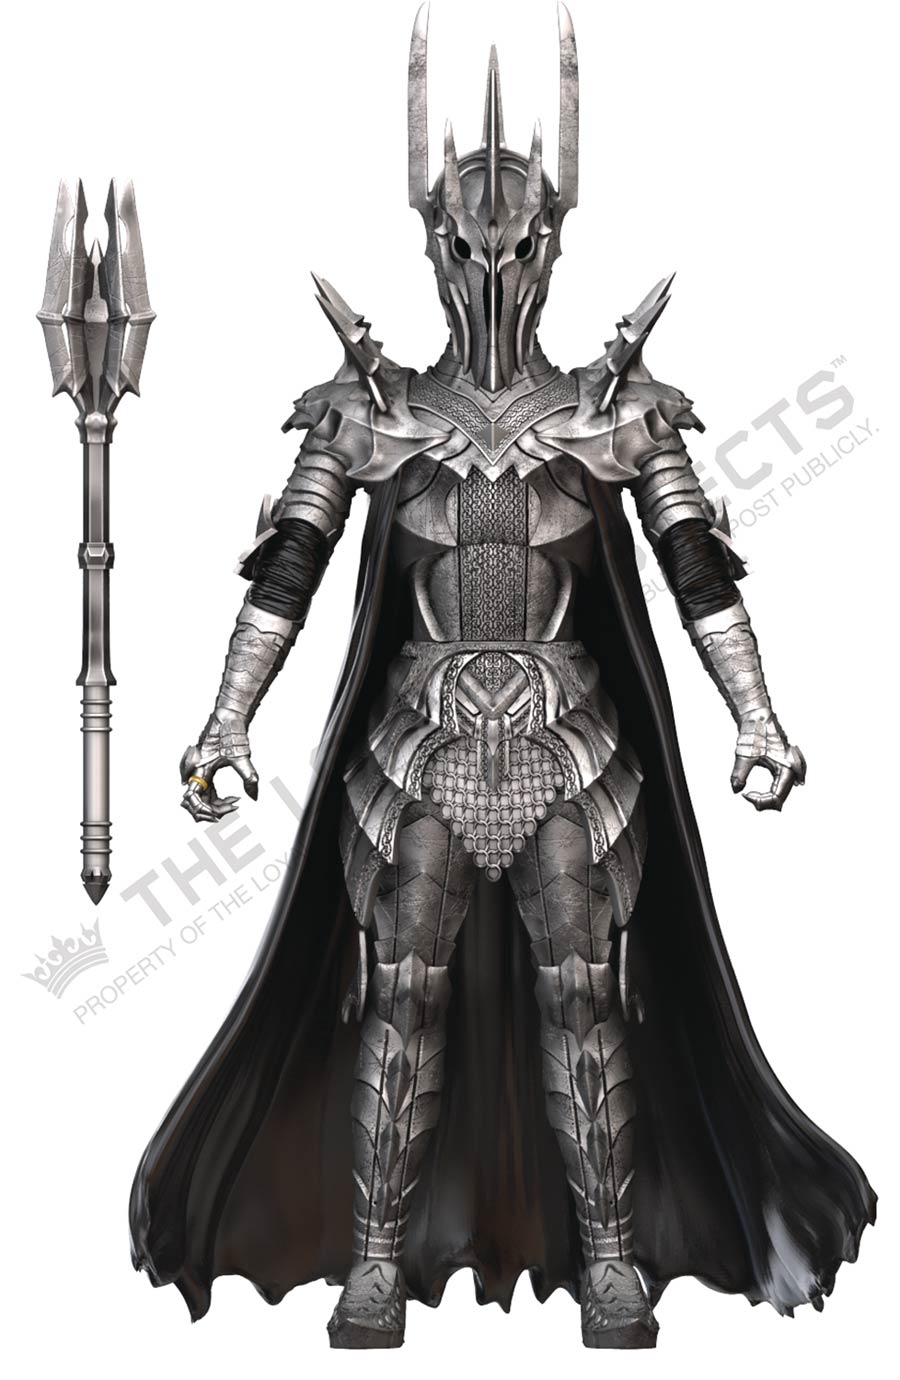 BST AXN Lord Of The Rings Sauron 5-Inch Action Figure